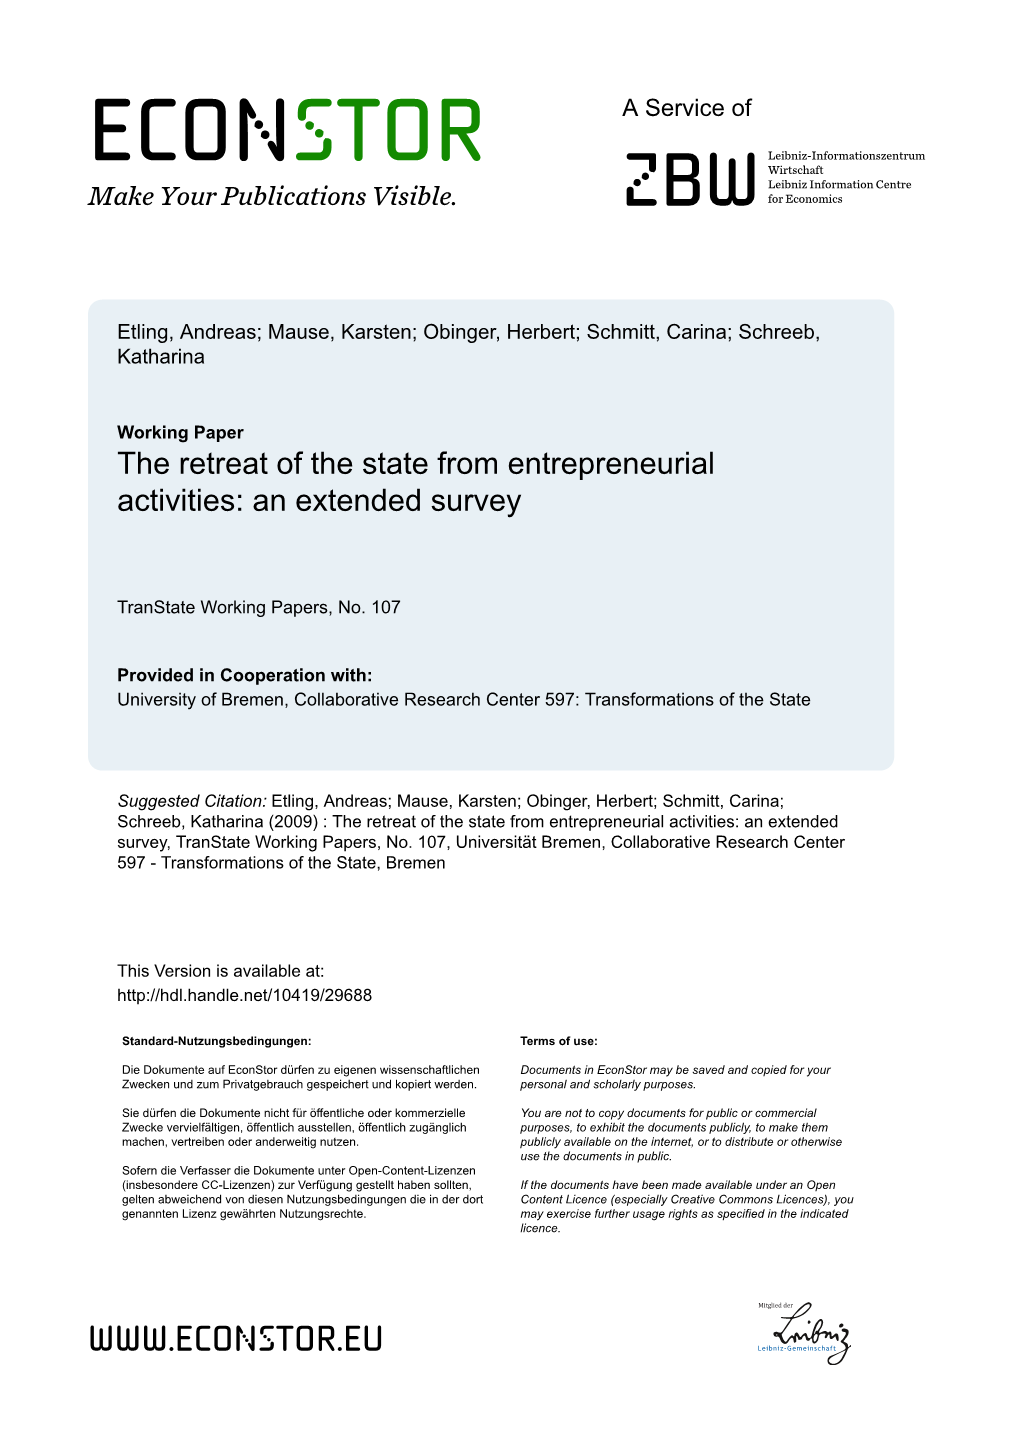 The Retreat of the State from Entrepreneurial Activities: an Extended Survey